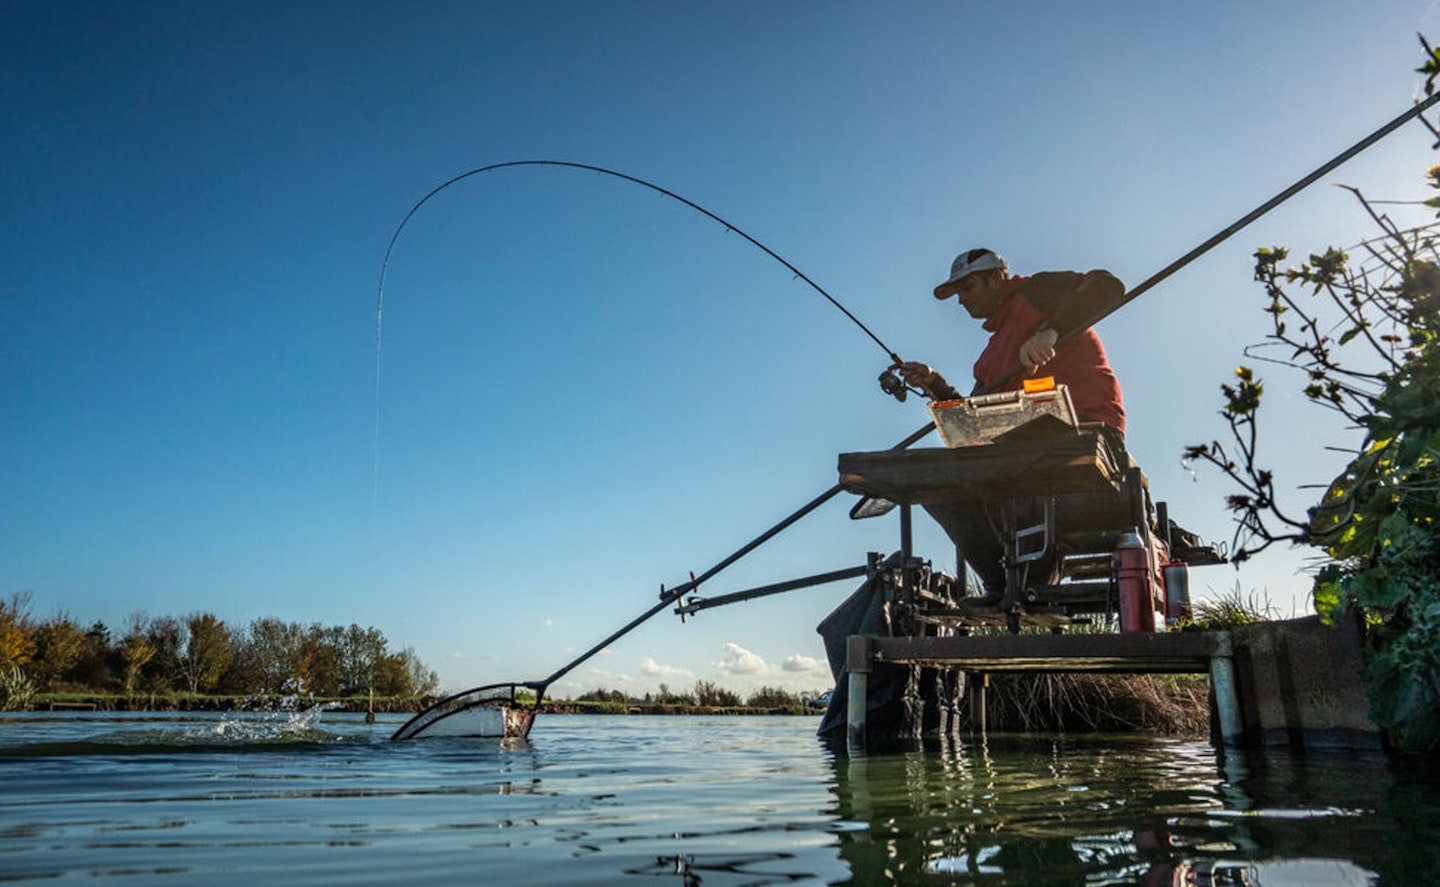 Accurate casting will lead to more fish in the net